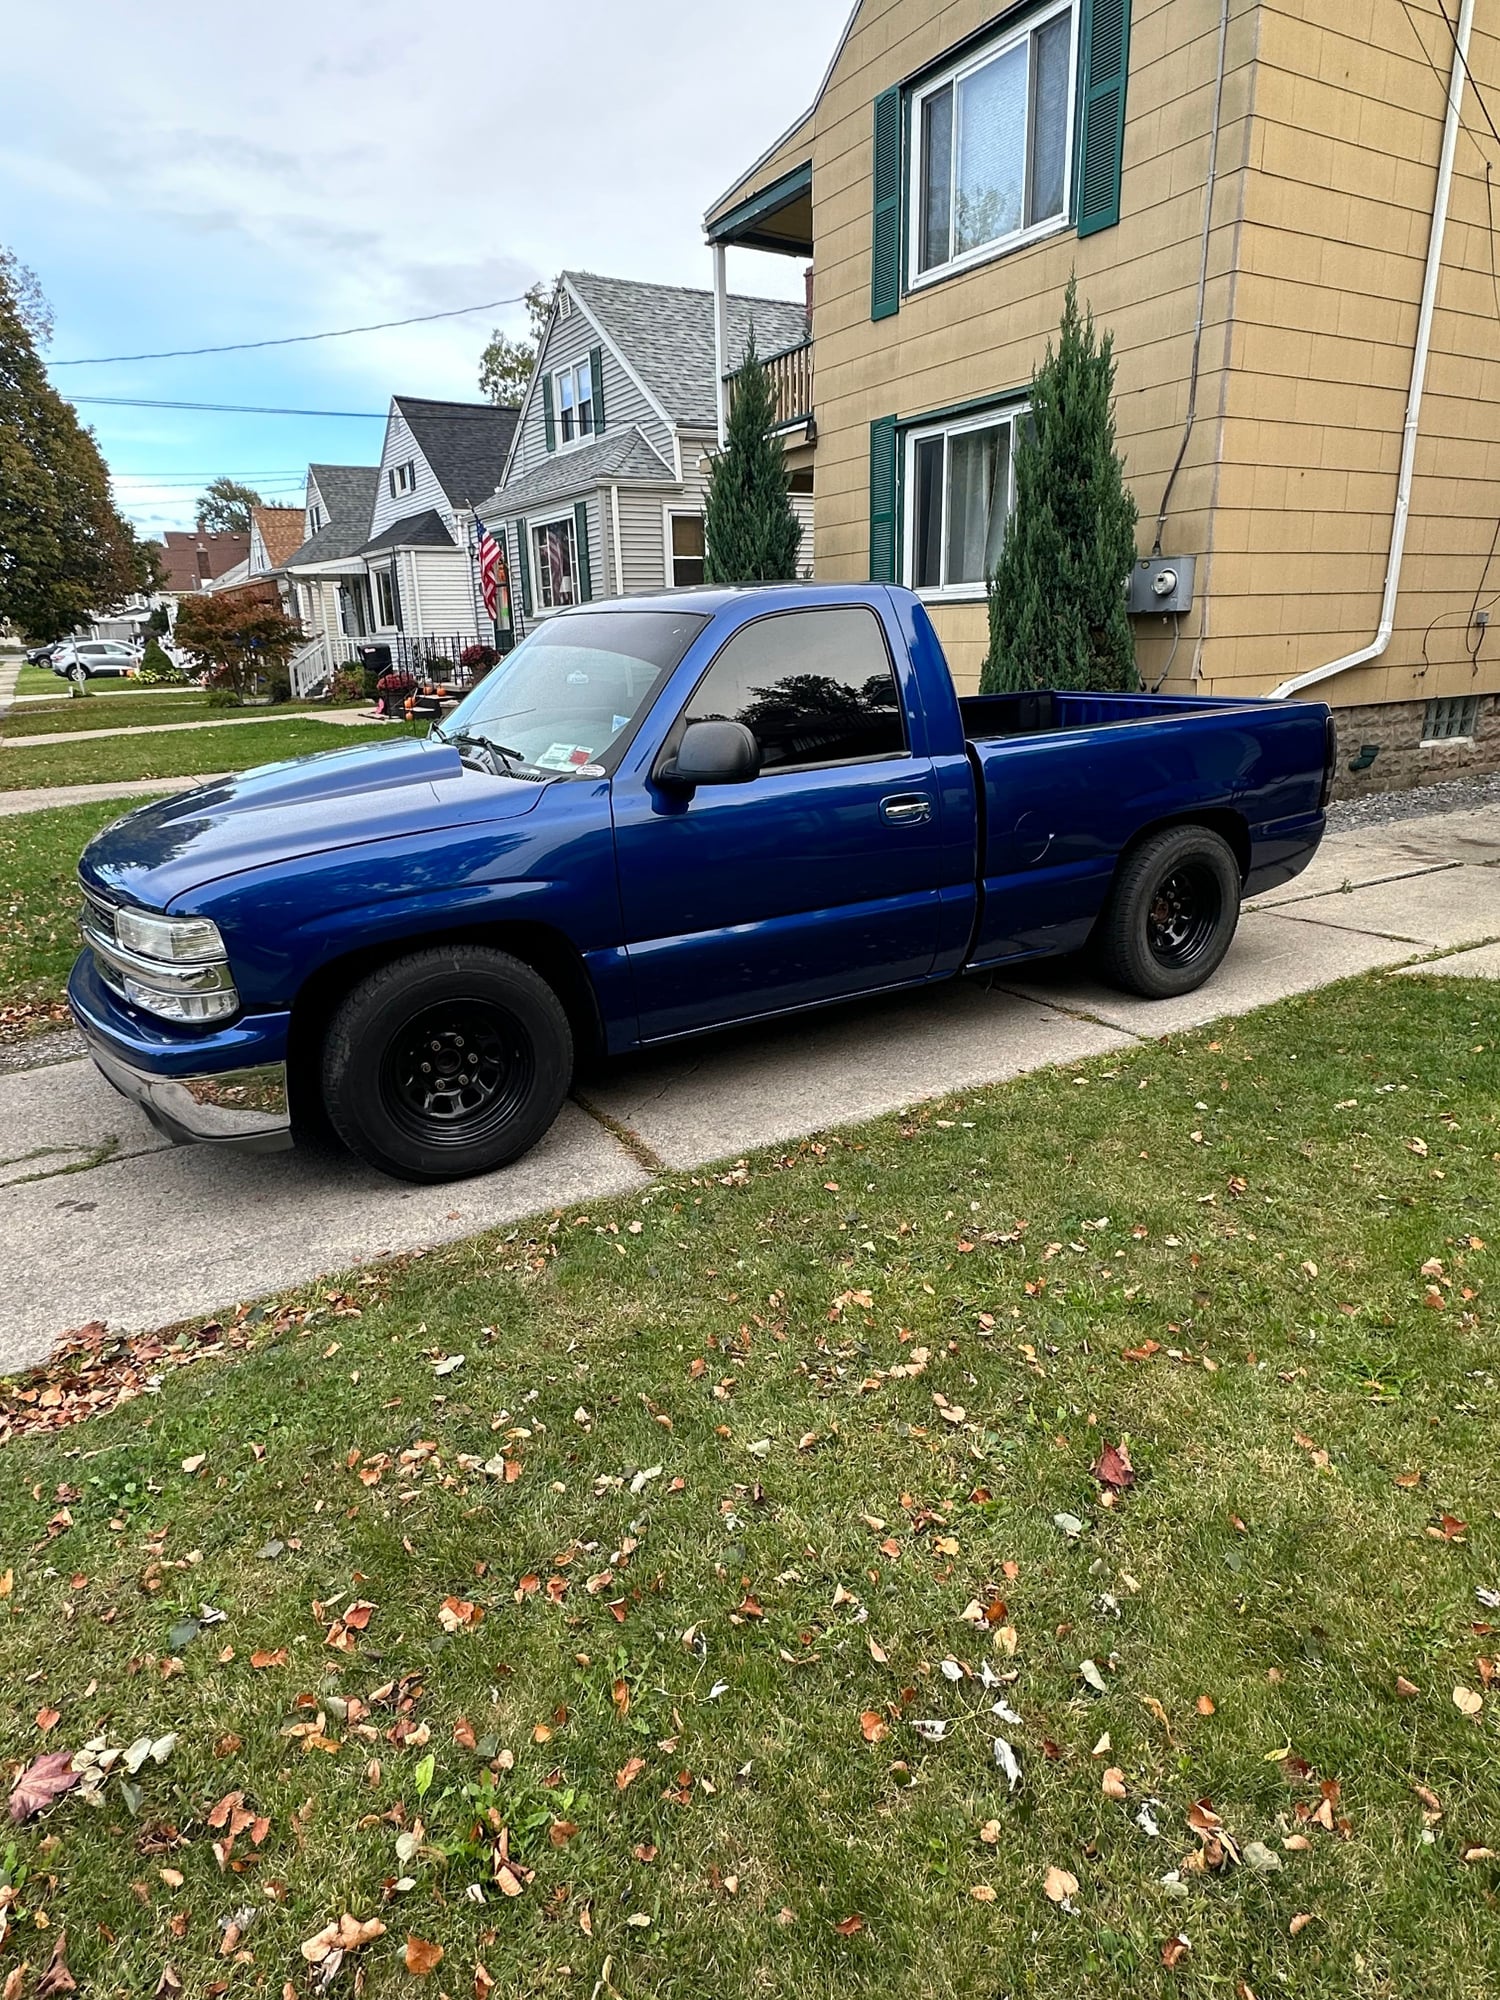 2000 Chevrolet Silverado 1500 - 2000 Chevy RCSB Roller - Used - VIN 1GCEC14V5YZ289652 - 109,000 Miles - 8 cyl - 2WD - Automatic - Truck - Blue - Orchard Park, NY 14224, United States